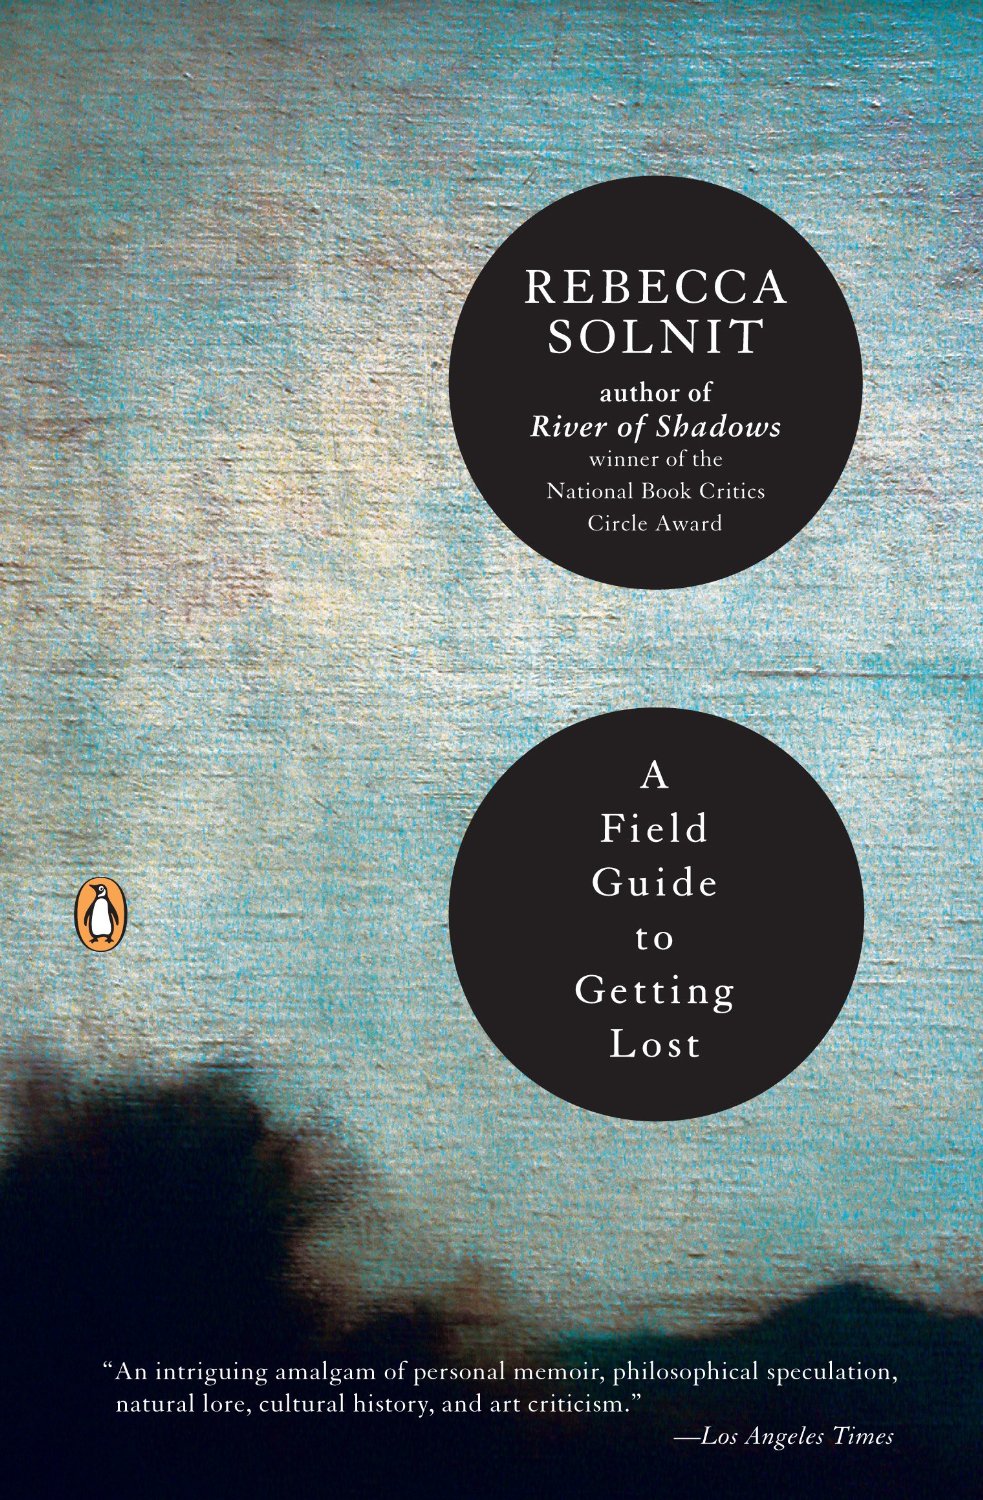 Book Review: “A Field Guide to Getting Lost” -Rebecca Solnit (2006)